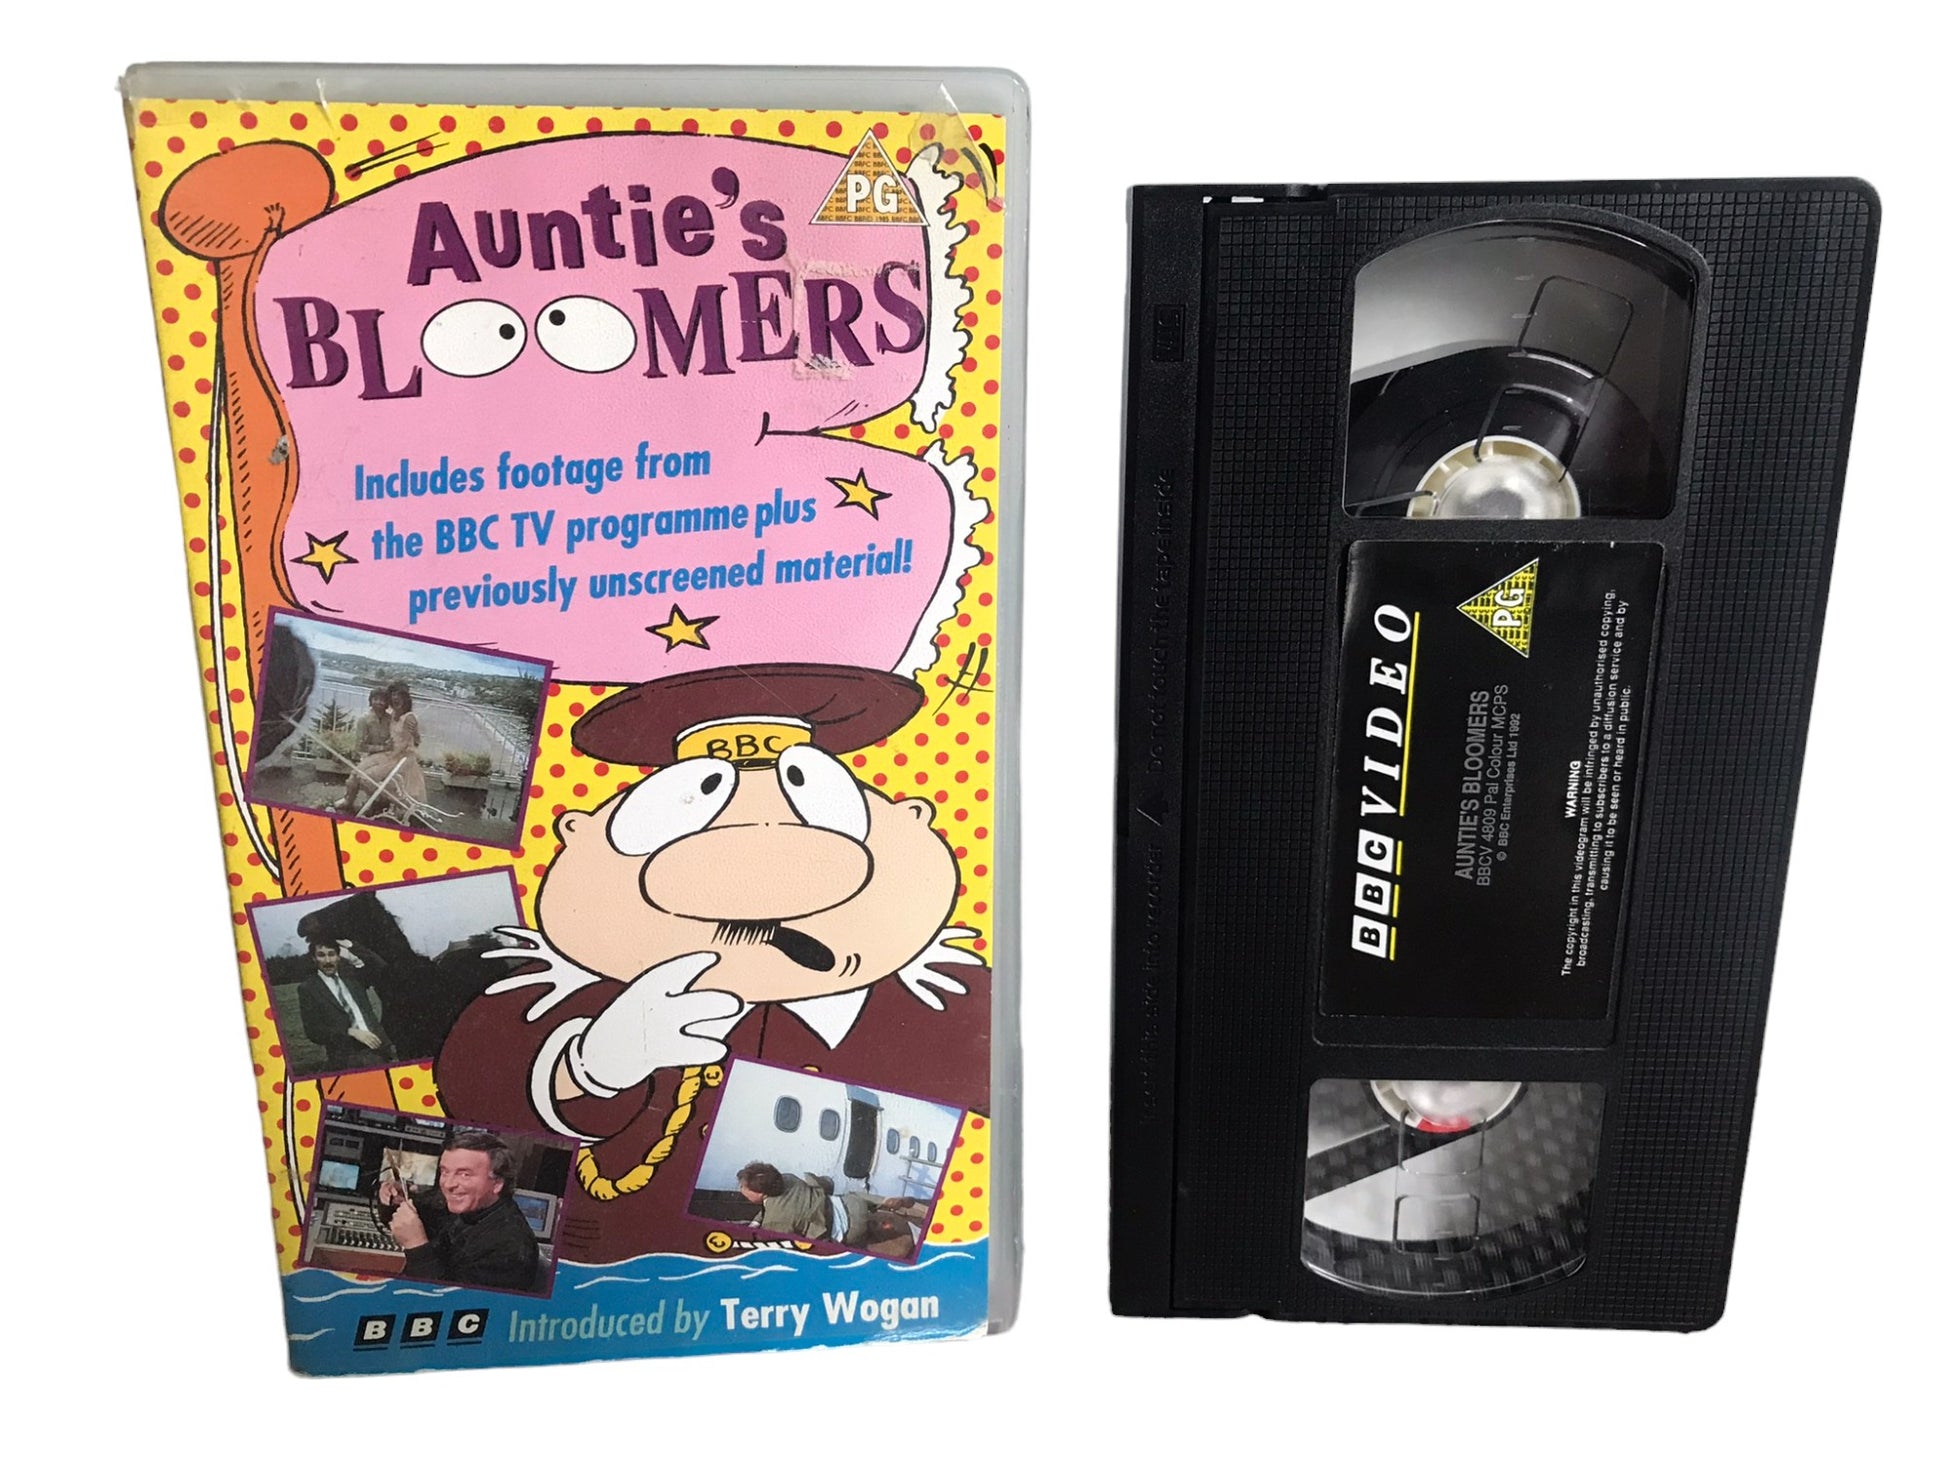 Auntie's Bloomers - Terry Wogan- BBV Video - Childrens - Pal - VHS-